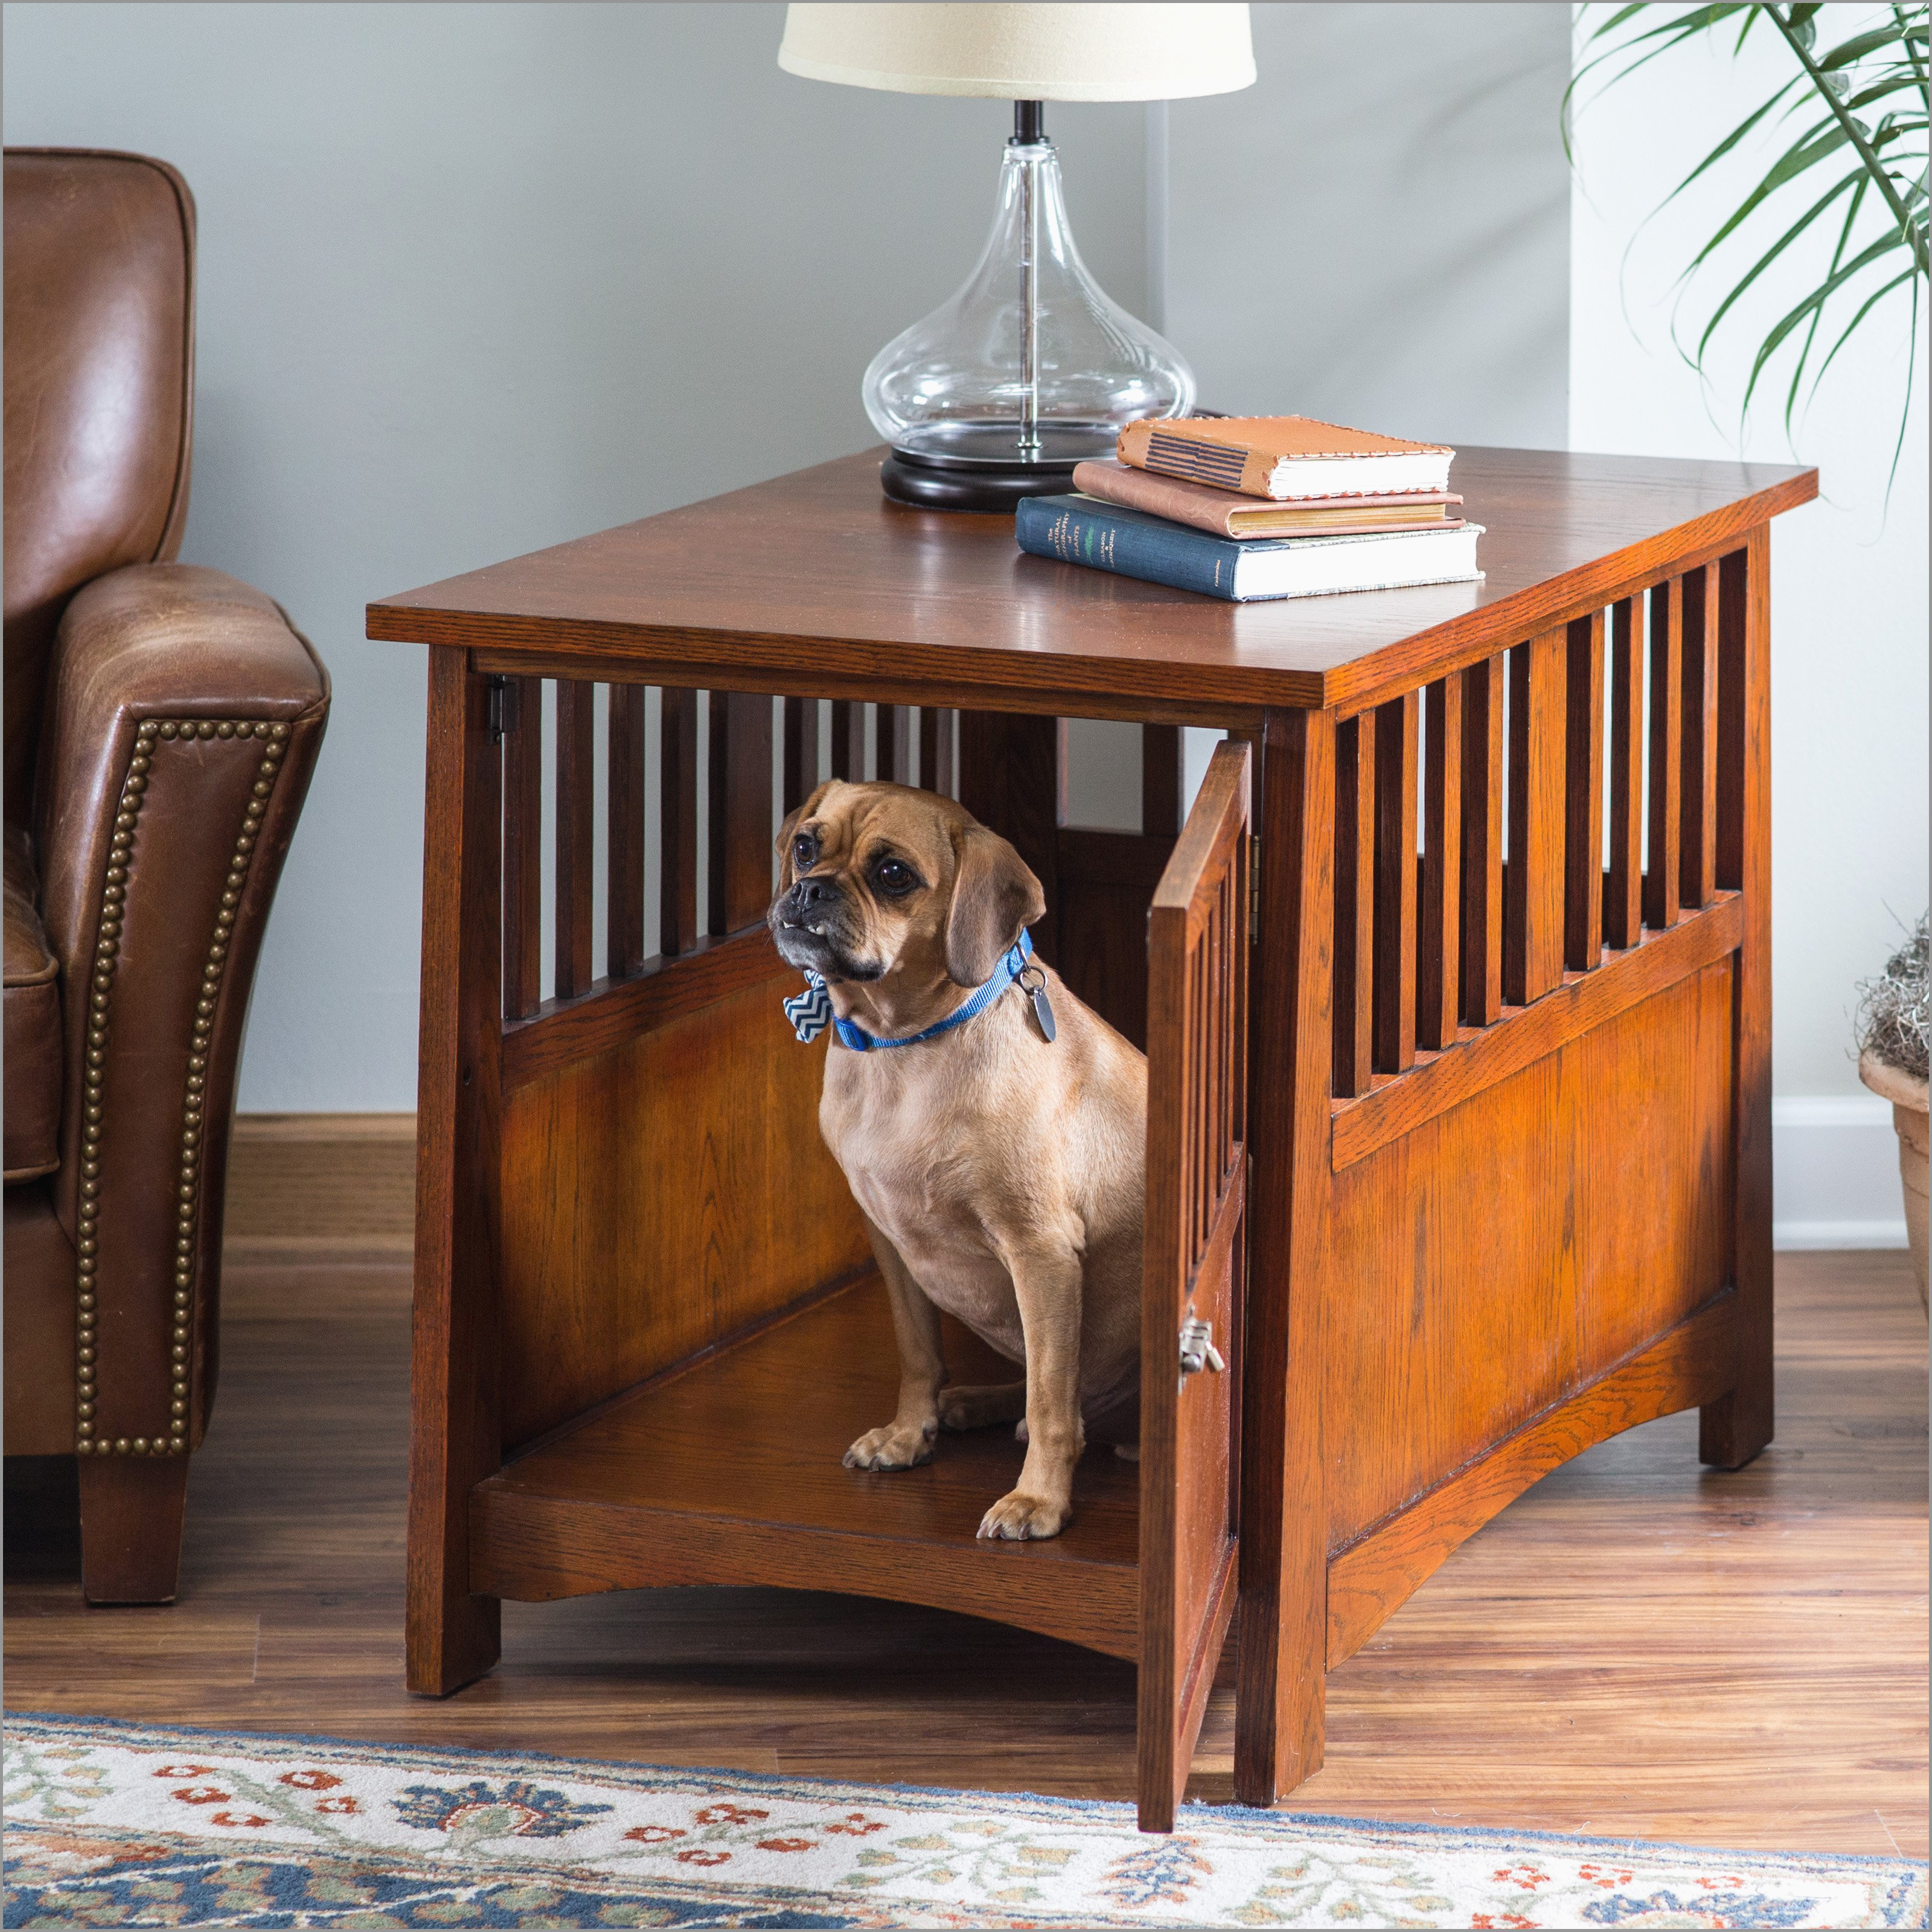 agreable galerie dog crate furniture styleestatemanagement beau boomer amp george everett mission pet end table kennel plans free round brown patio lamps for mirrored nightstands